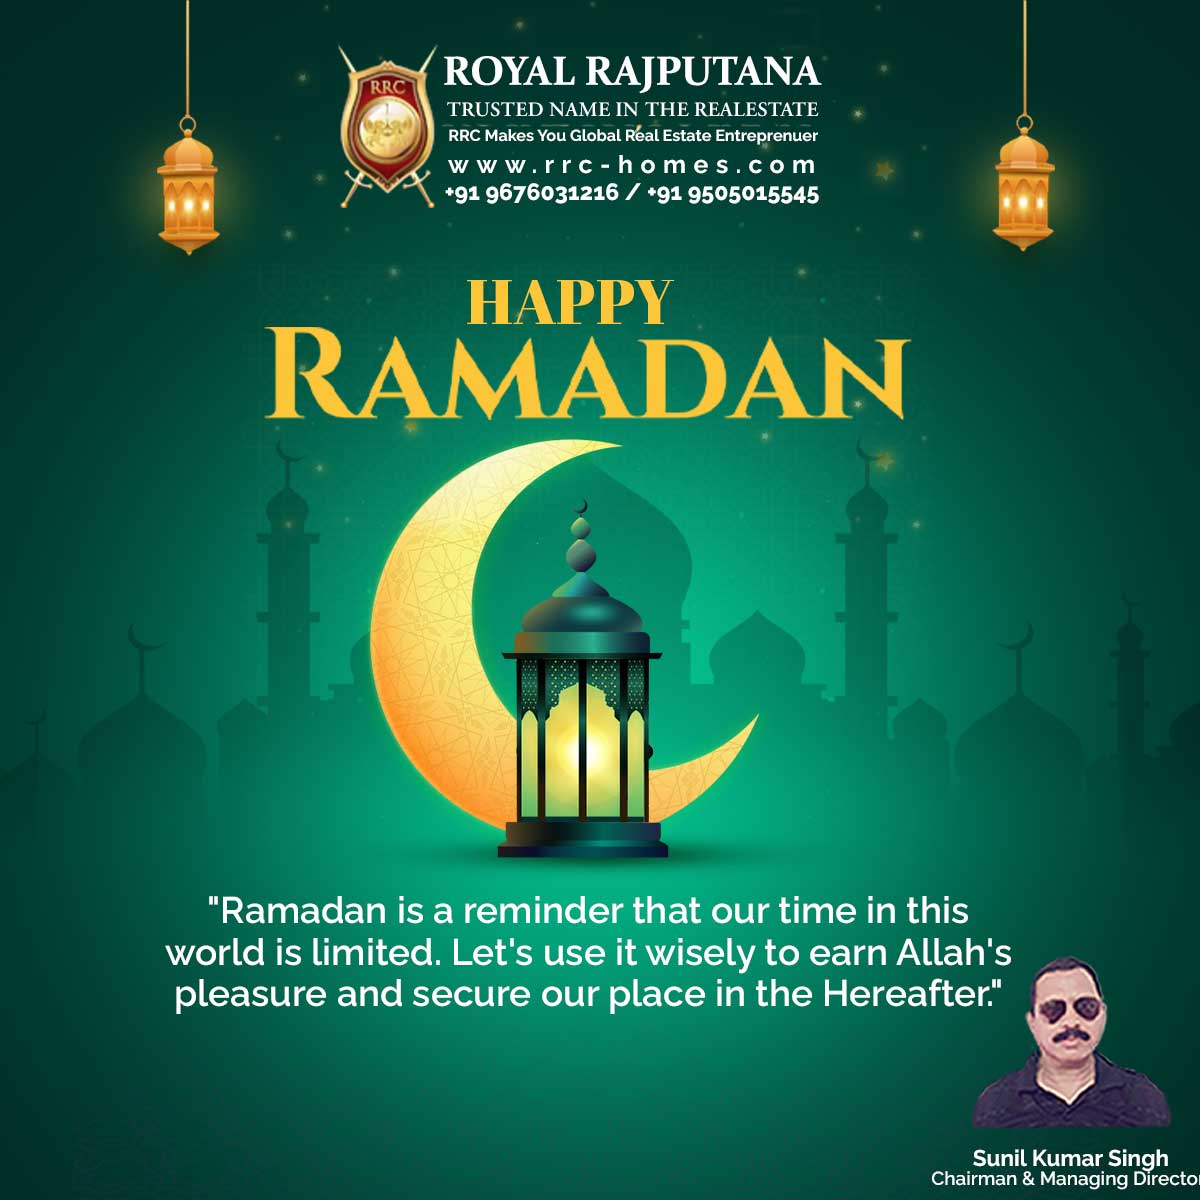 Happy Ramadan..!
'Ramadan is a reminder that our time in this world is limited. Let's use it wisely to earn Allah's pleasure and secure our place in the Hereafter.'

#royalrajputana #royalrajputanahomes #rrc #rrchomes   #positive #situation #happy #ramadan #heaven #god #month